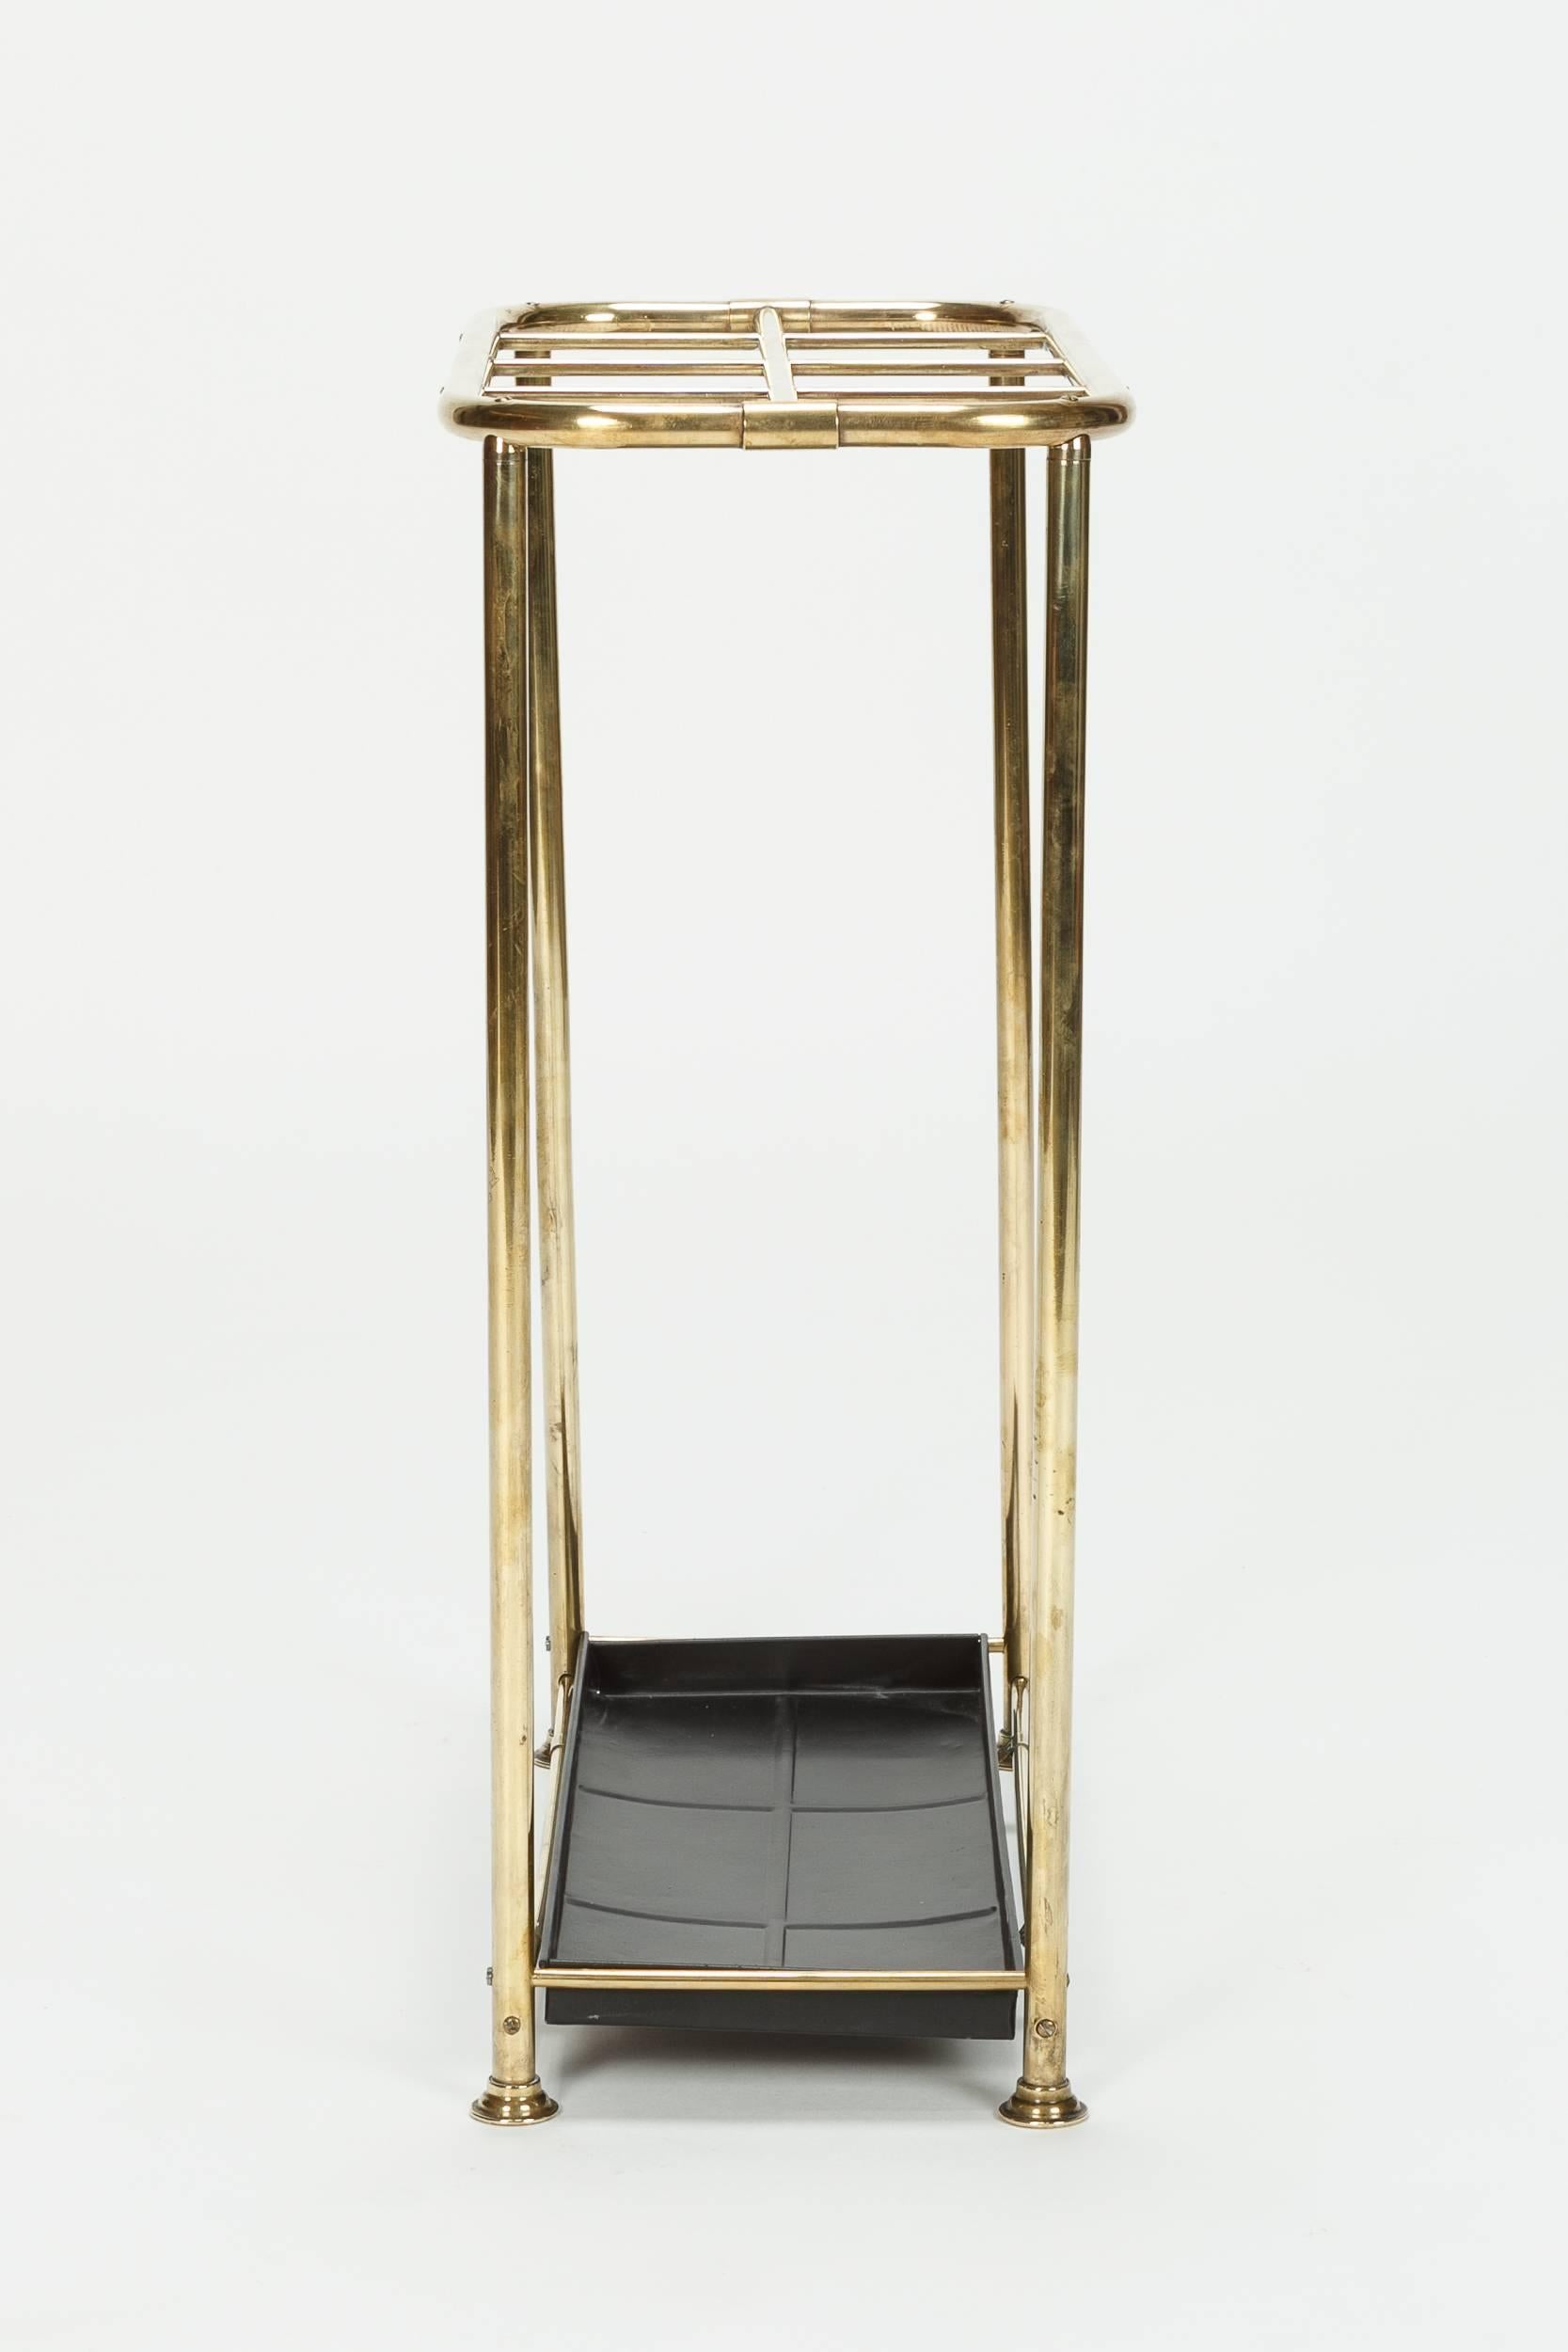 Coming from the Bauhaus school, very high quality handcraft, produced for a big house or a hotel. Fine brass frame with all original parts and a water sink made of metal sheet. Authentical and finely re-polished item.